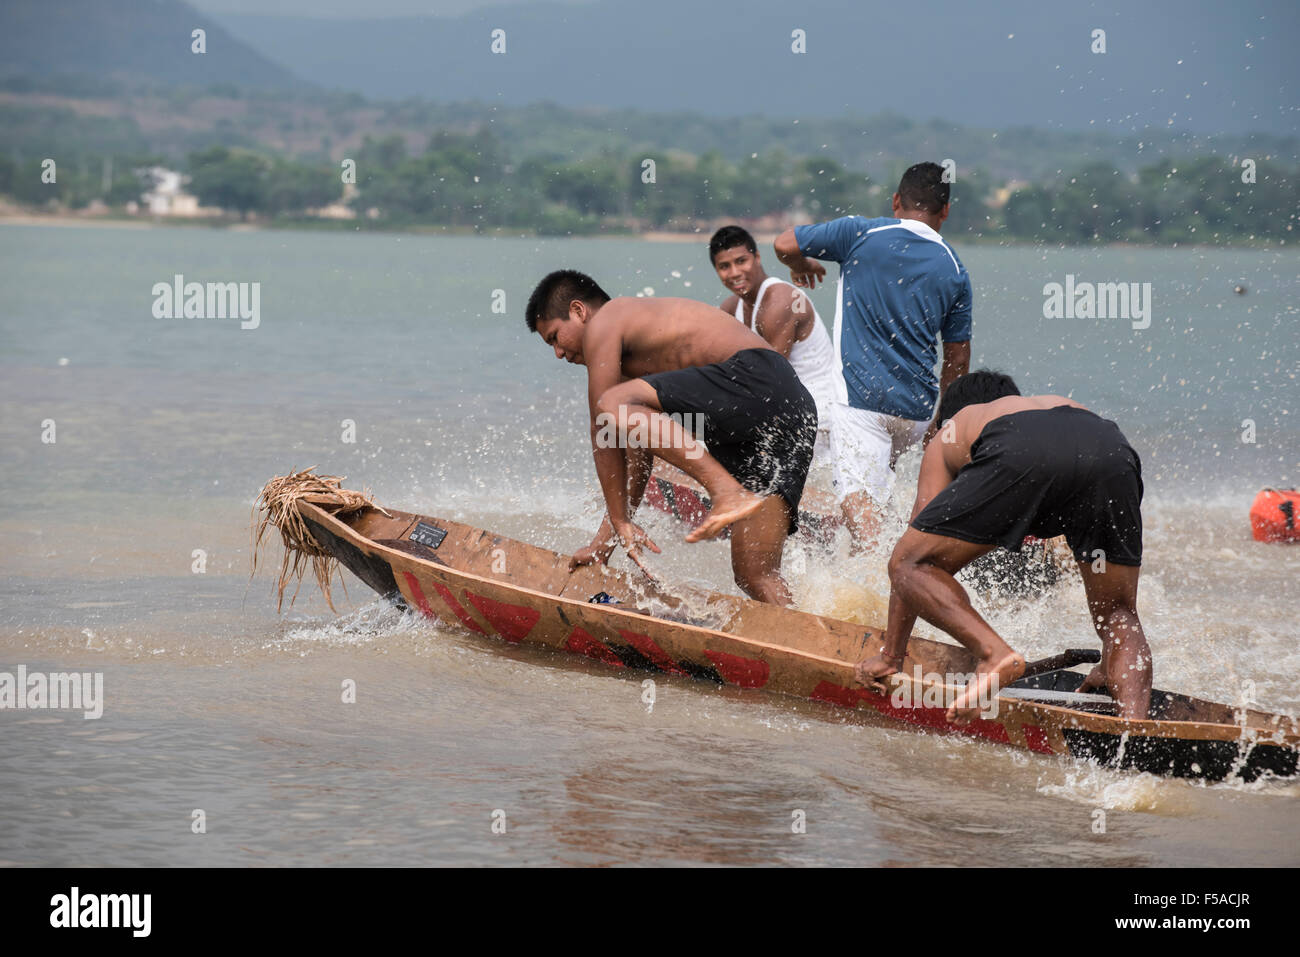 Palmas, Brazil. 30th October, 2015. A team jump into their canoe at the beginnning of a heat at the International Indigenous Games, in the city of Palmas, Tocantins State, Brazil. Credit:  Sue Cunningham Photographic/Alamy Live News Stock Photo